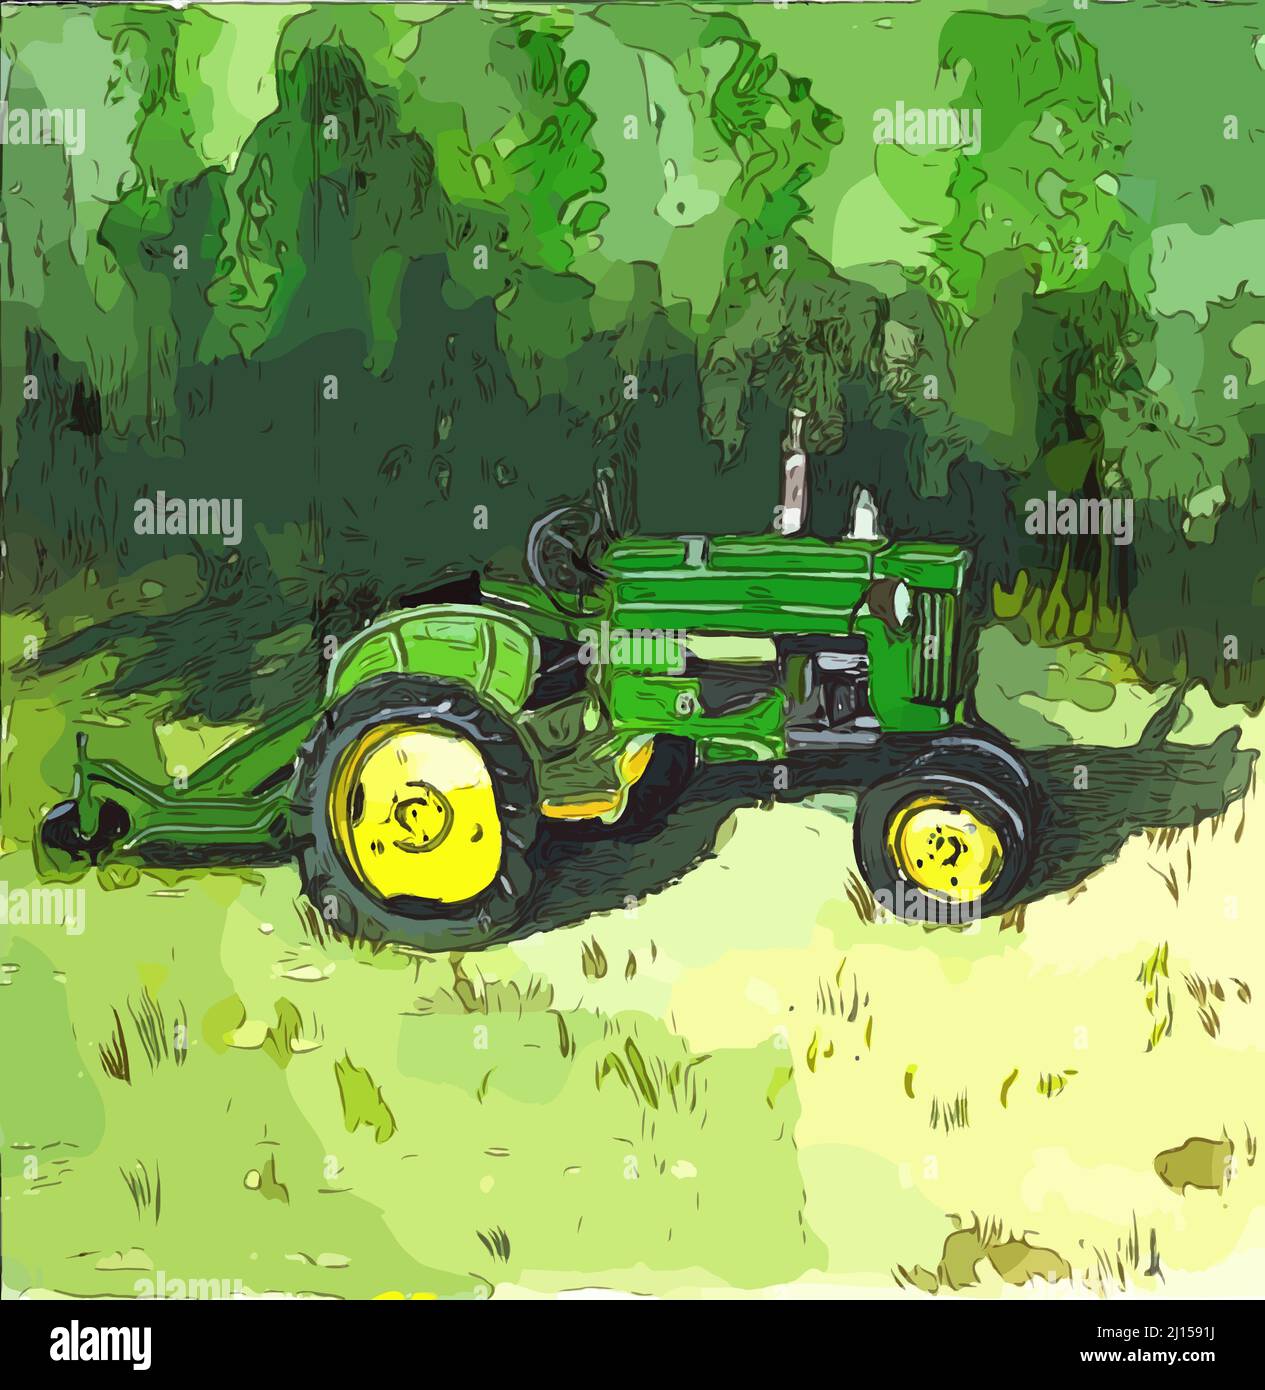 Illustration of a tractor with mower attachment Stock Photo